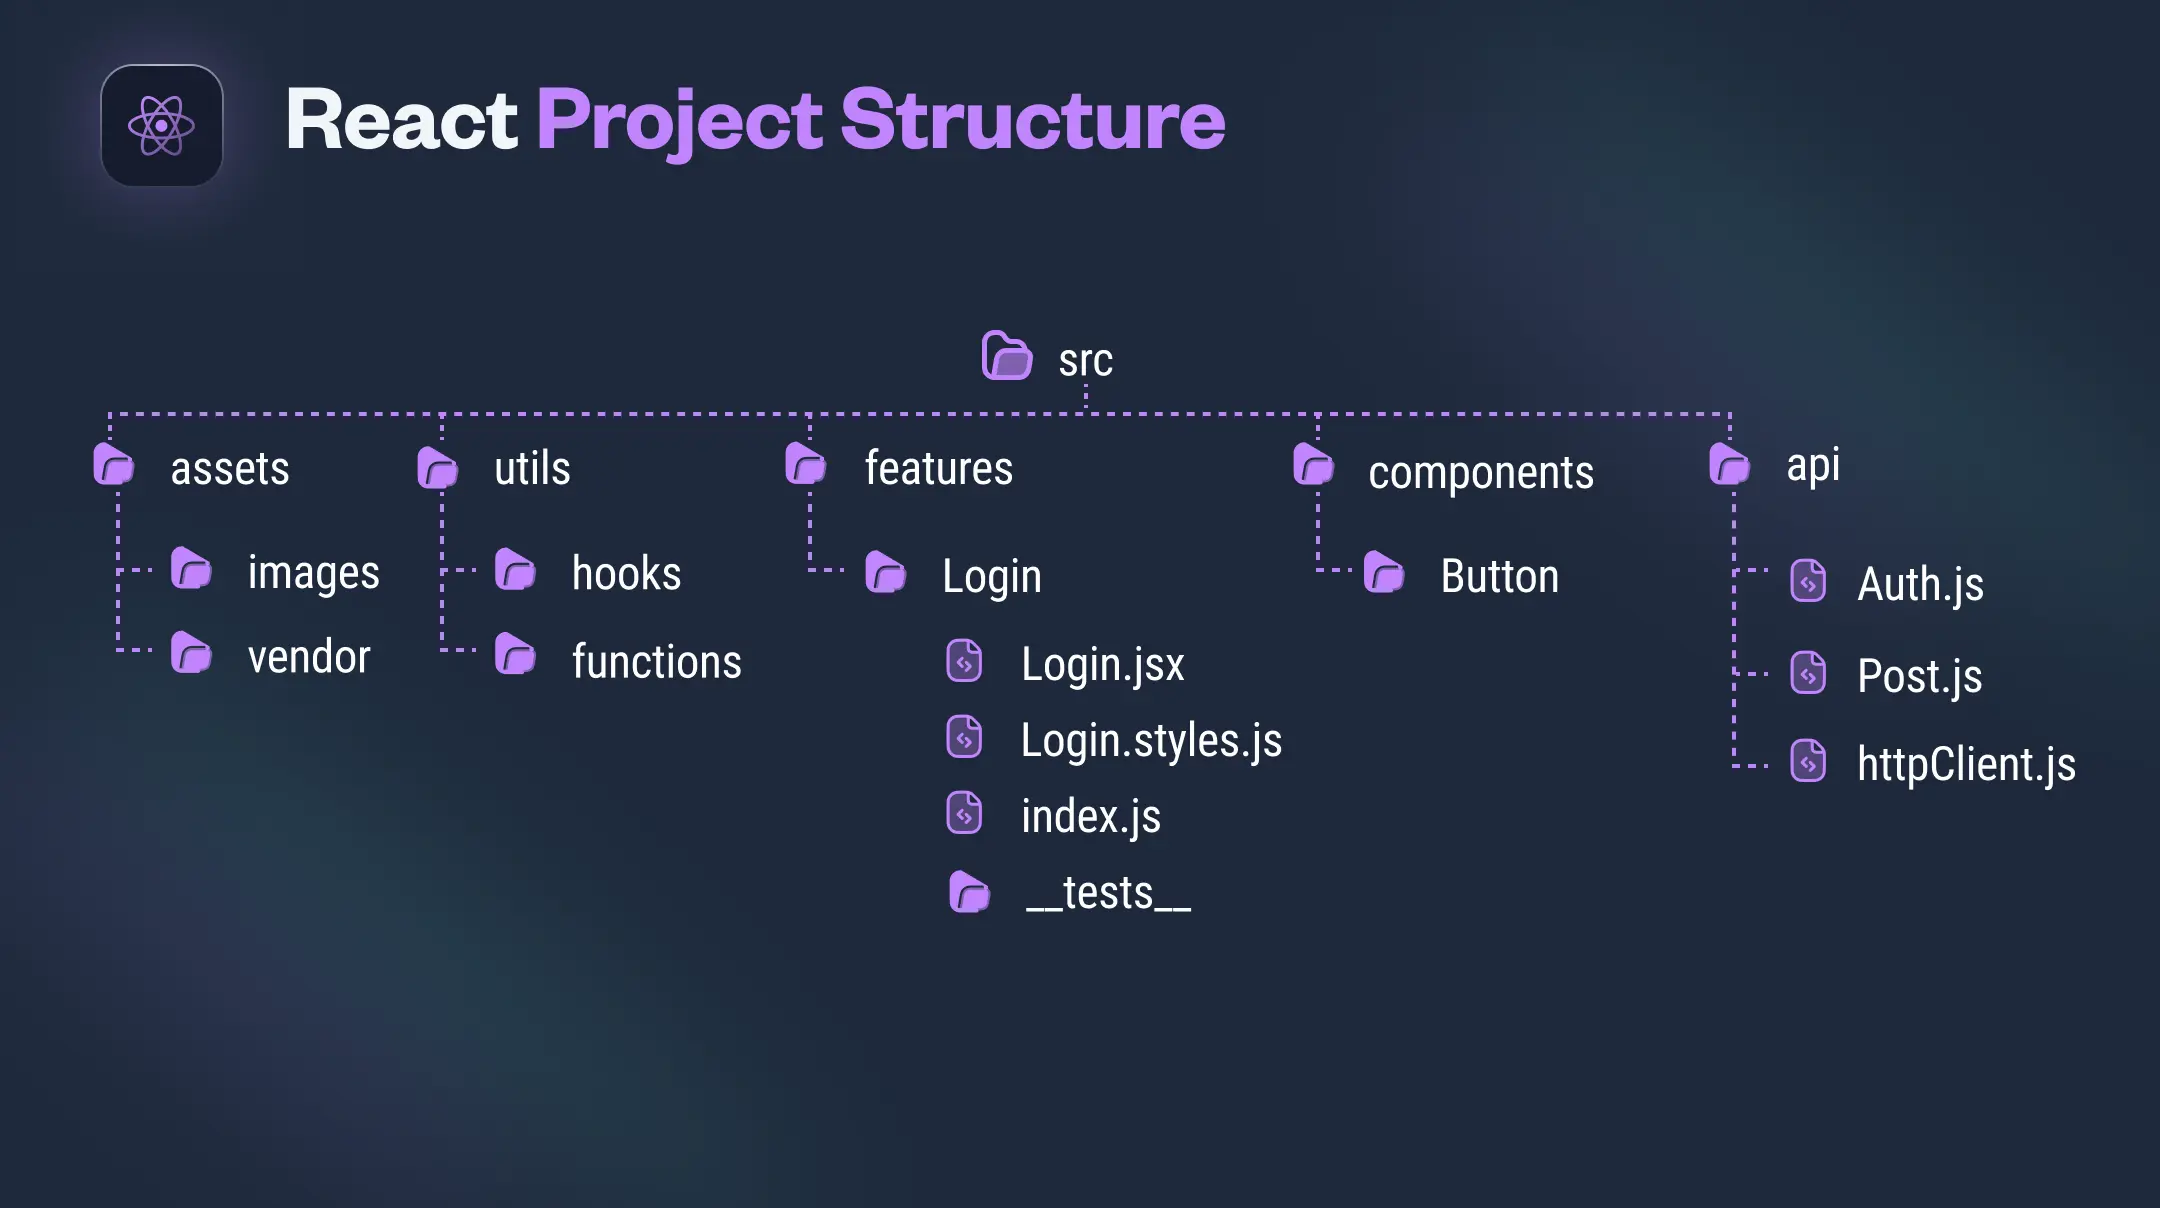 infographic explaining how to structure a react project